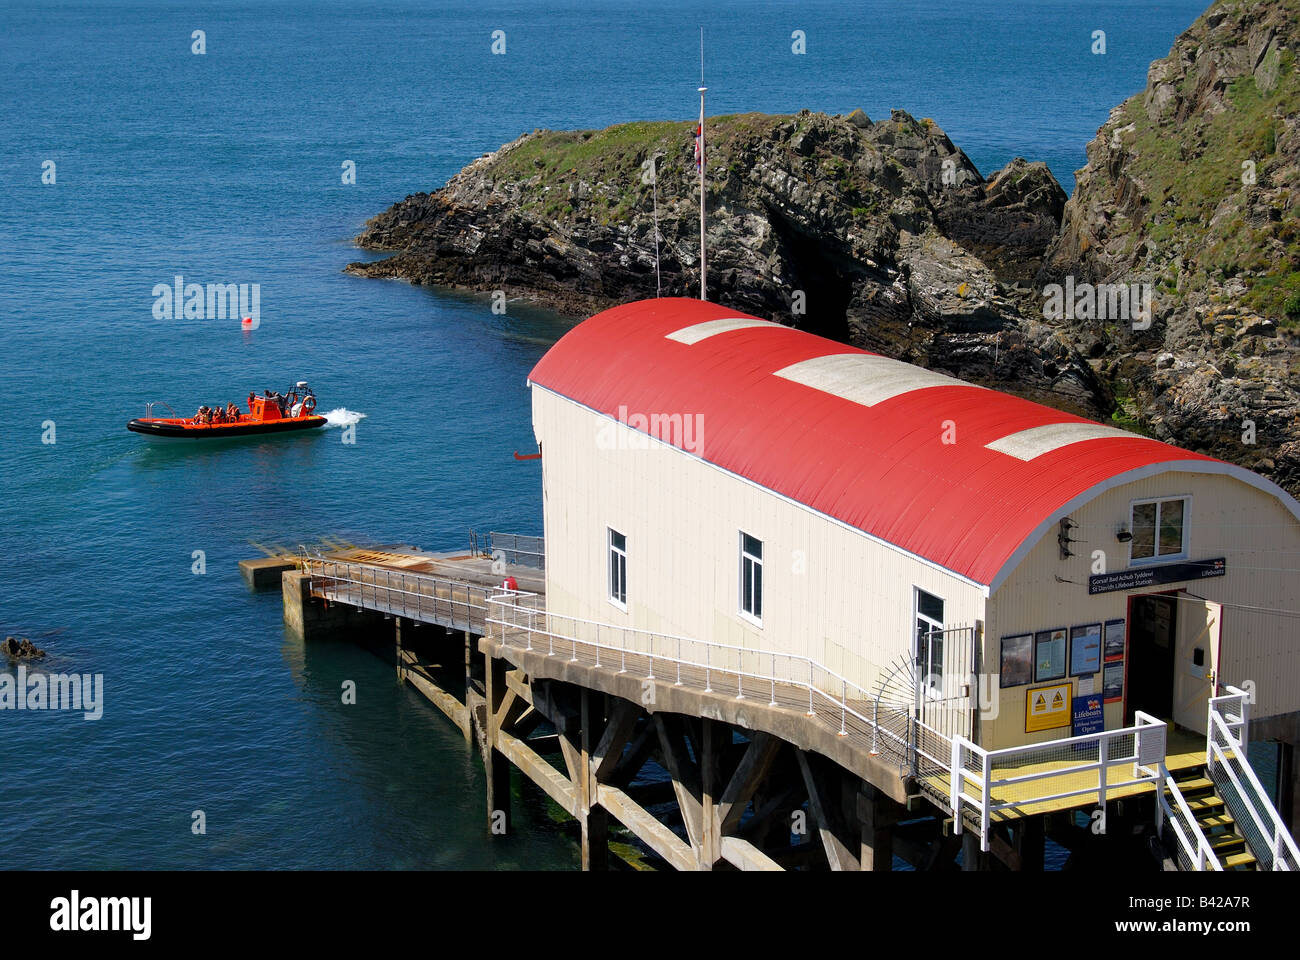 St.Justinians Lifeboat Station, St.Justinians, Pembrokeshire, Wales, United Kingdom Stock Photo